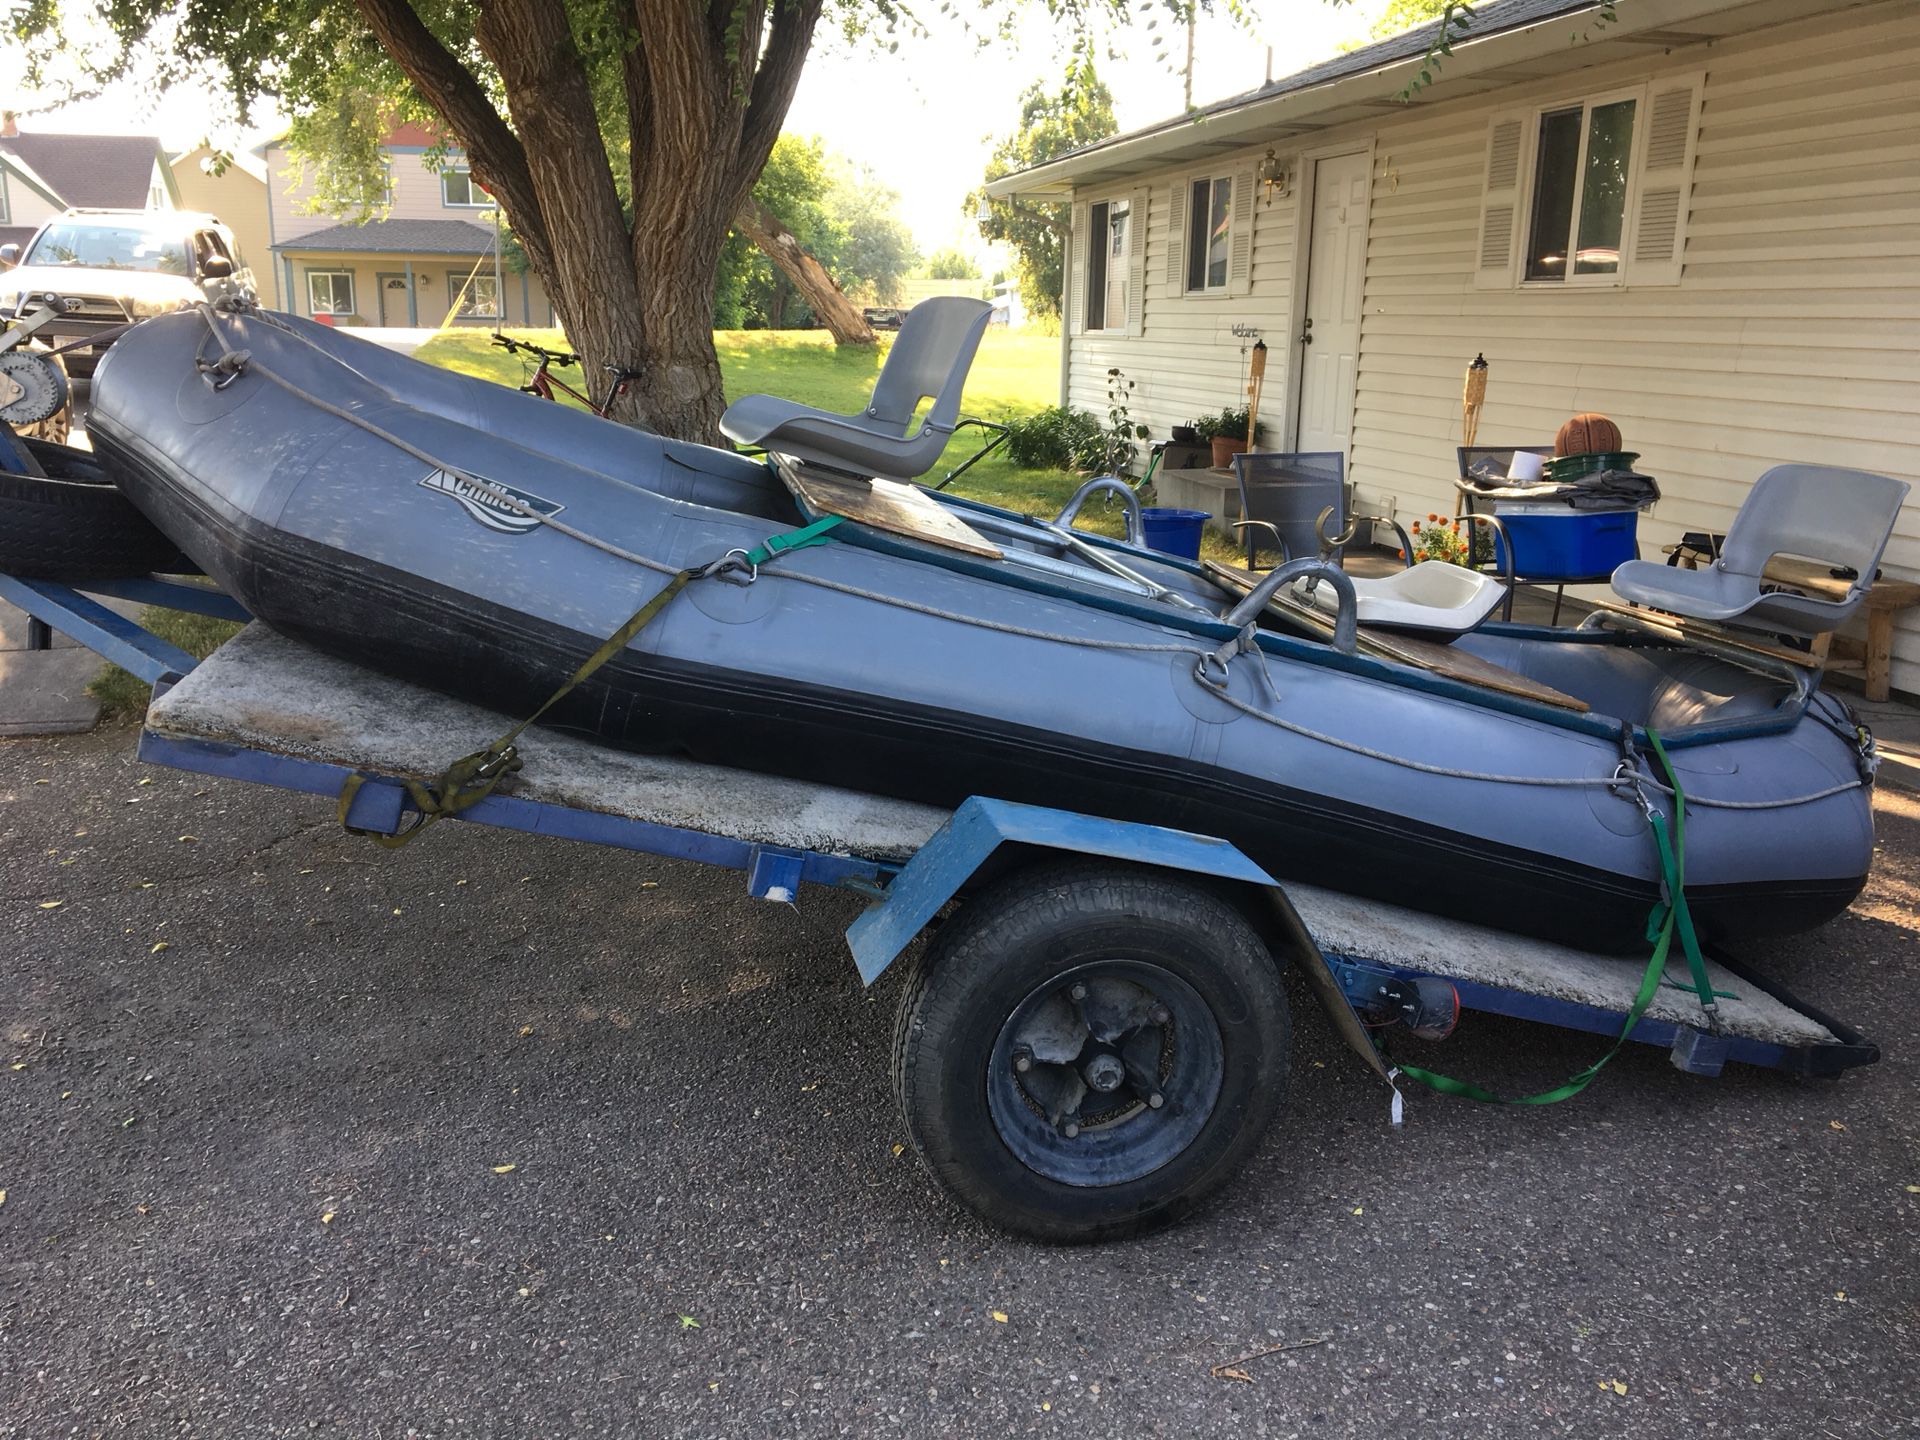 Achilles Raft and Trailer For Sale $2500 OBO